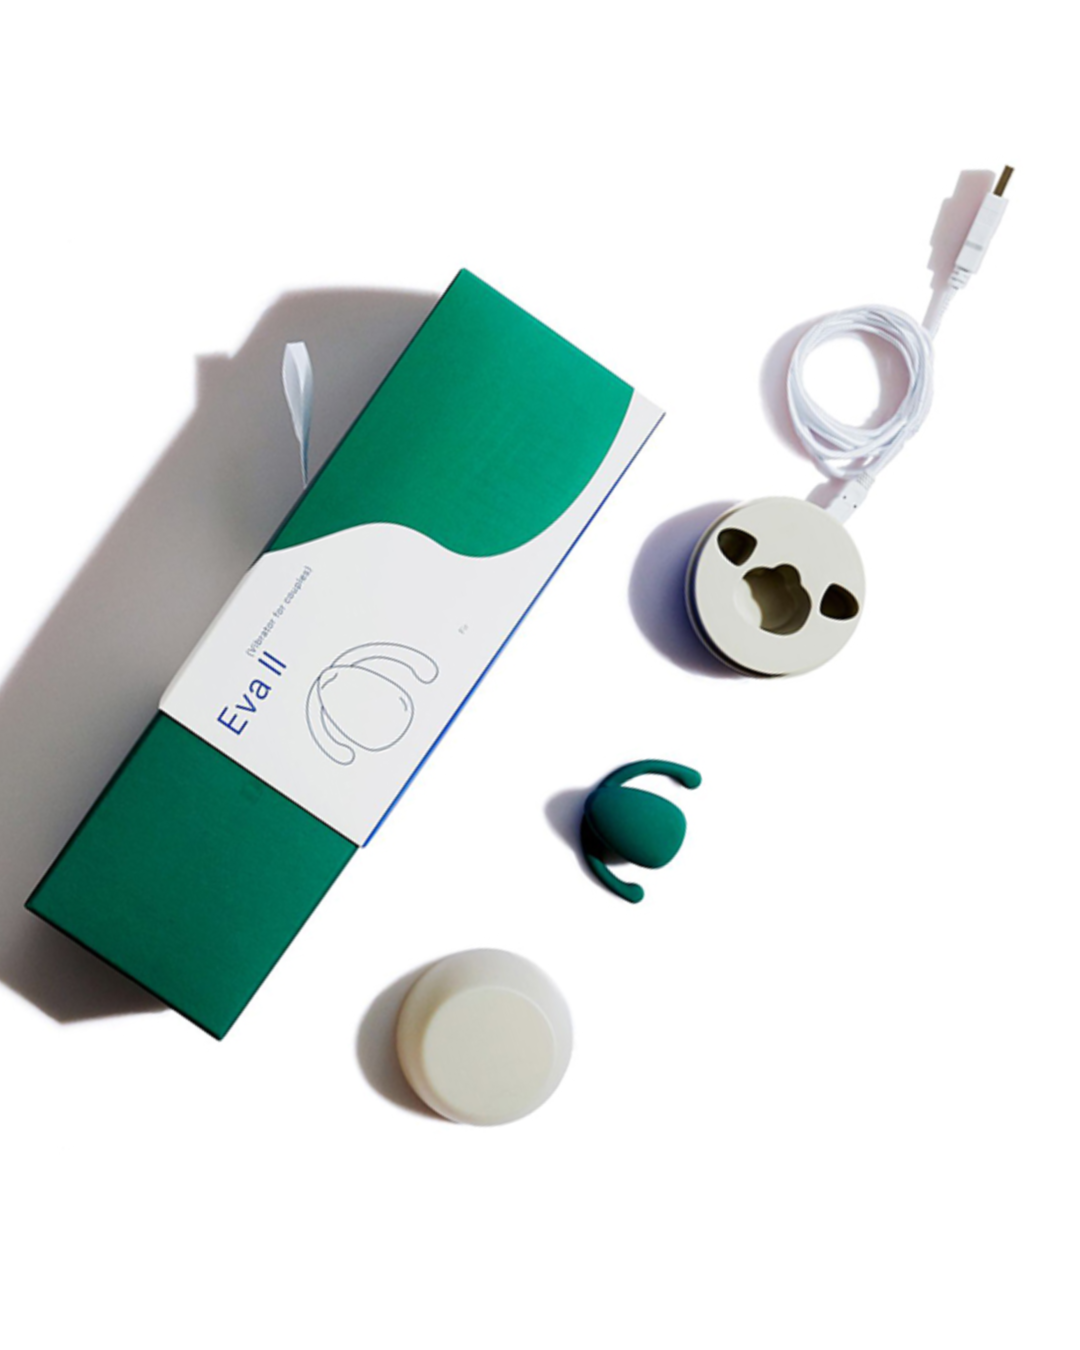 Eva II Hands-Free Silicone Rechargeable Clitoral Vibrator by Dame - Fir Green packaging